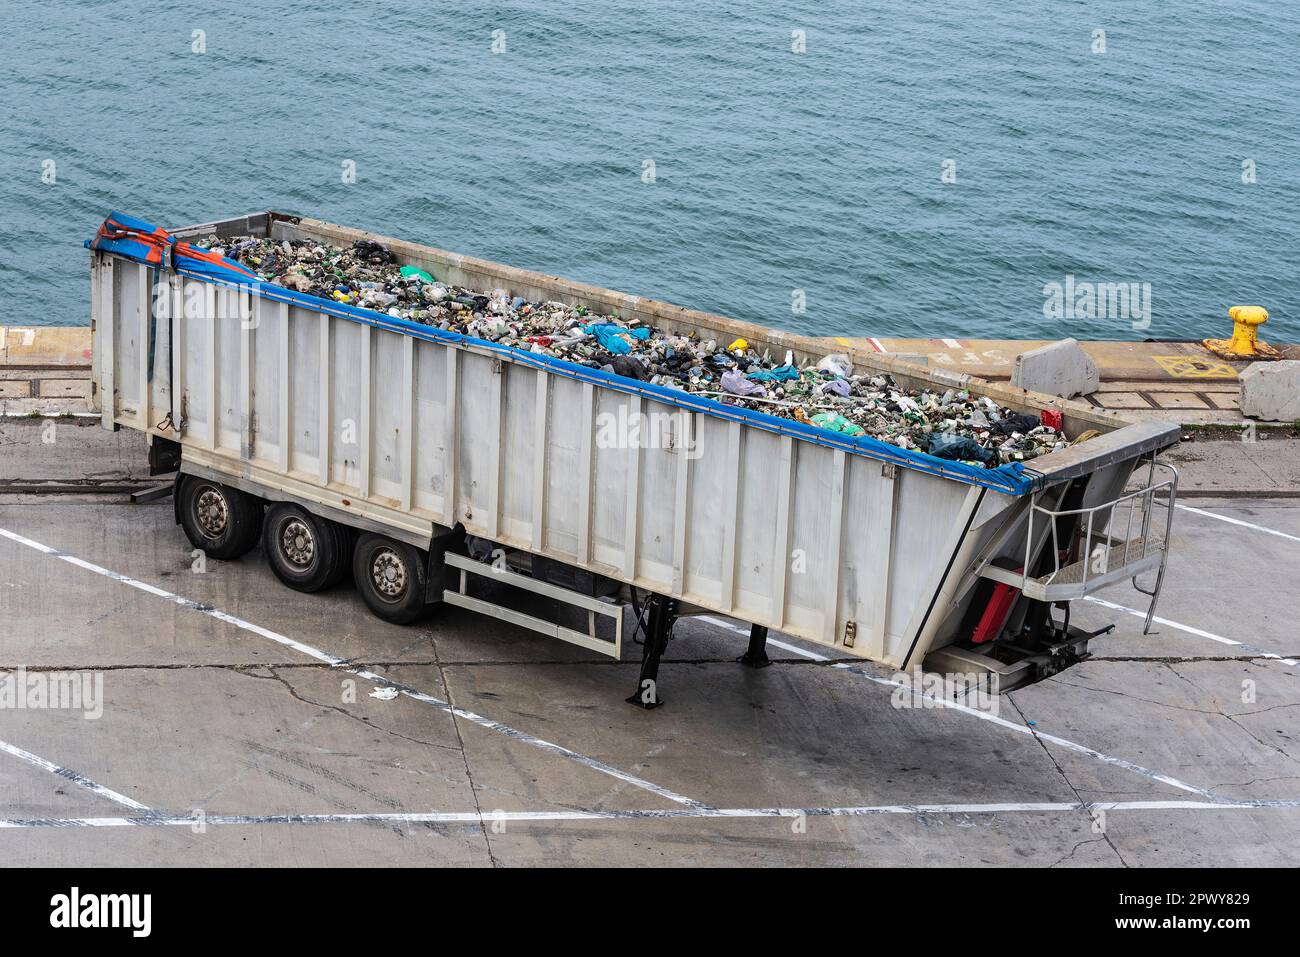 Overview of a container with glass bottles for recycling in the port of Barcelona, Catalonia, Spain Stock Photo